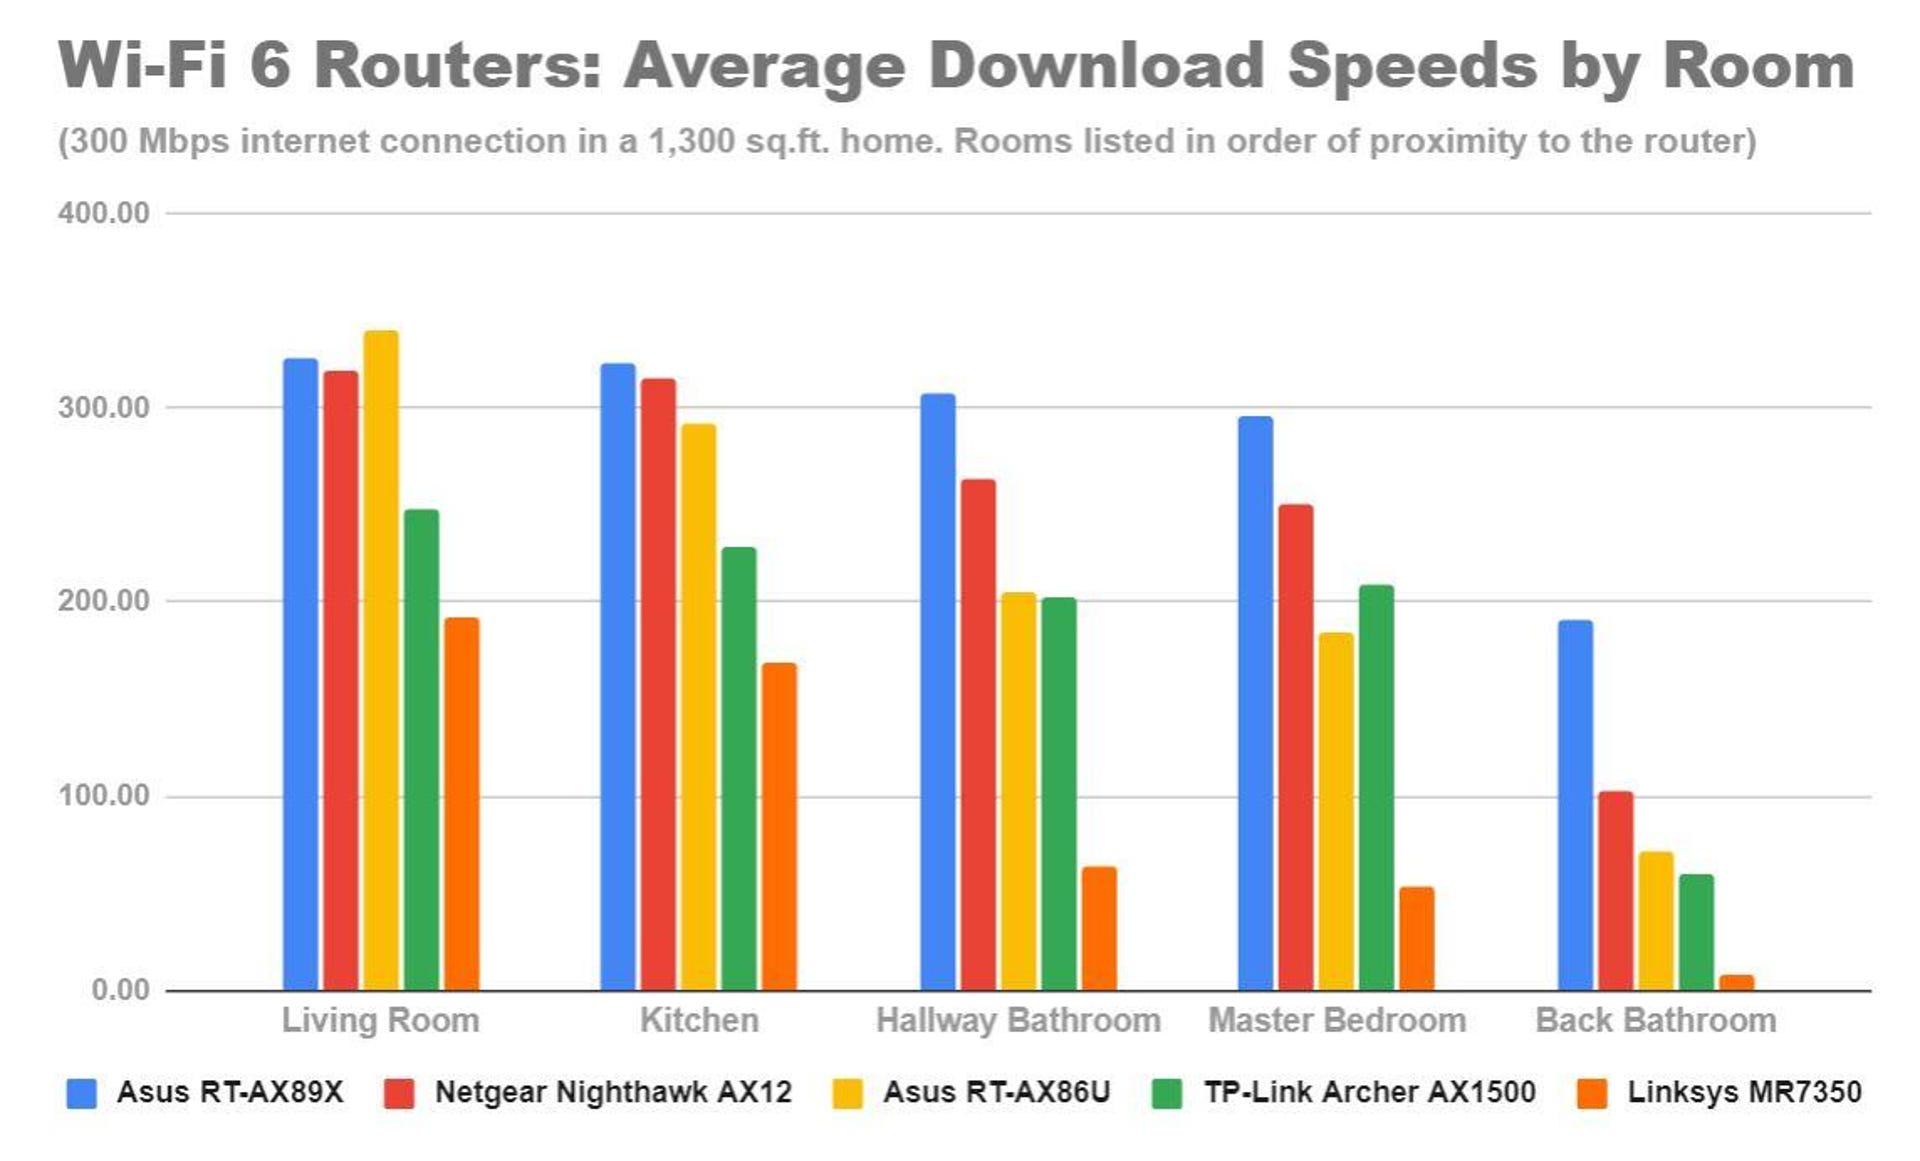 A bar graph showing the average download speeds for five different routers across five rooms of a 1,300 square foot home shows that the Asus RT-AX86U delivered the fastest speeds overall.